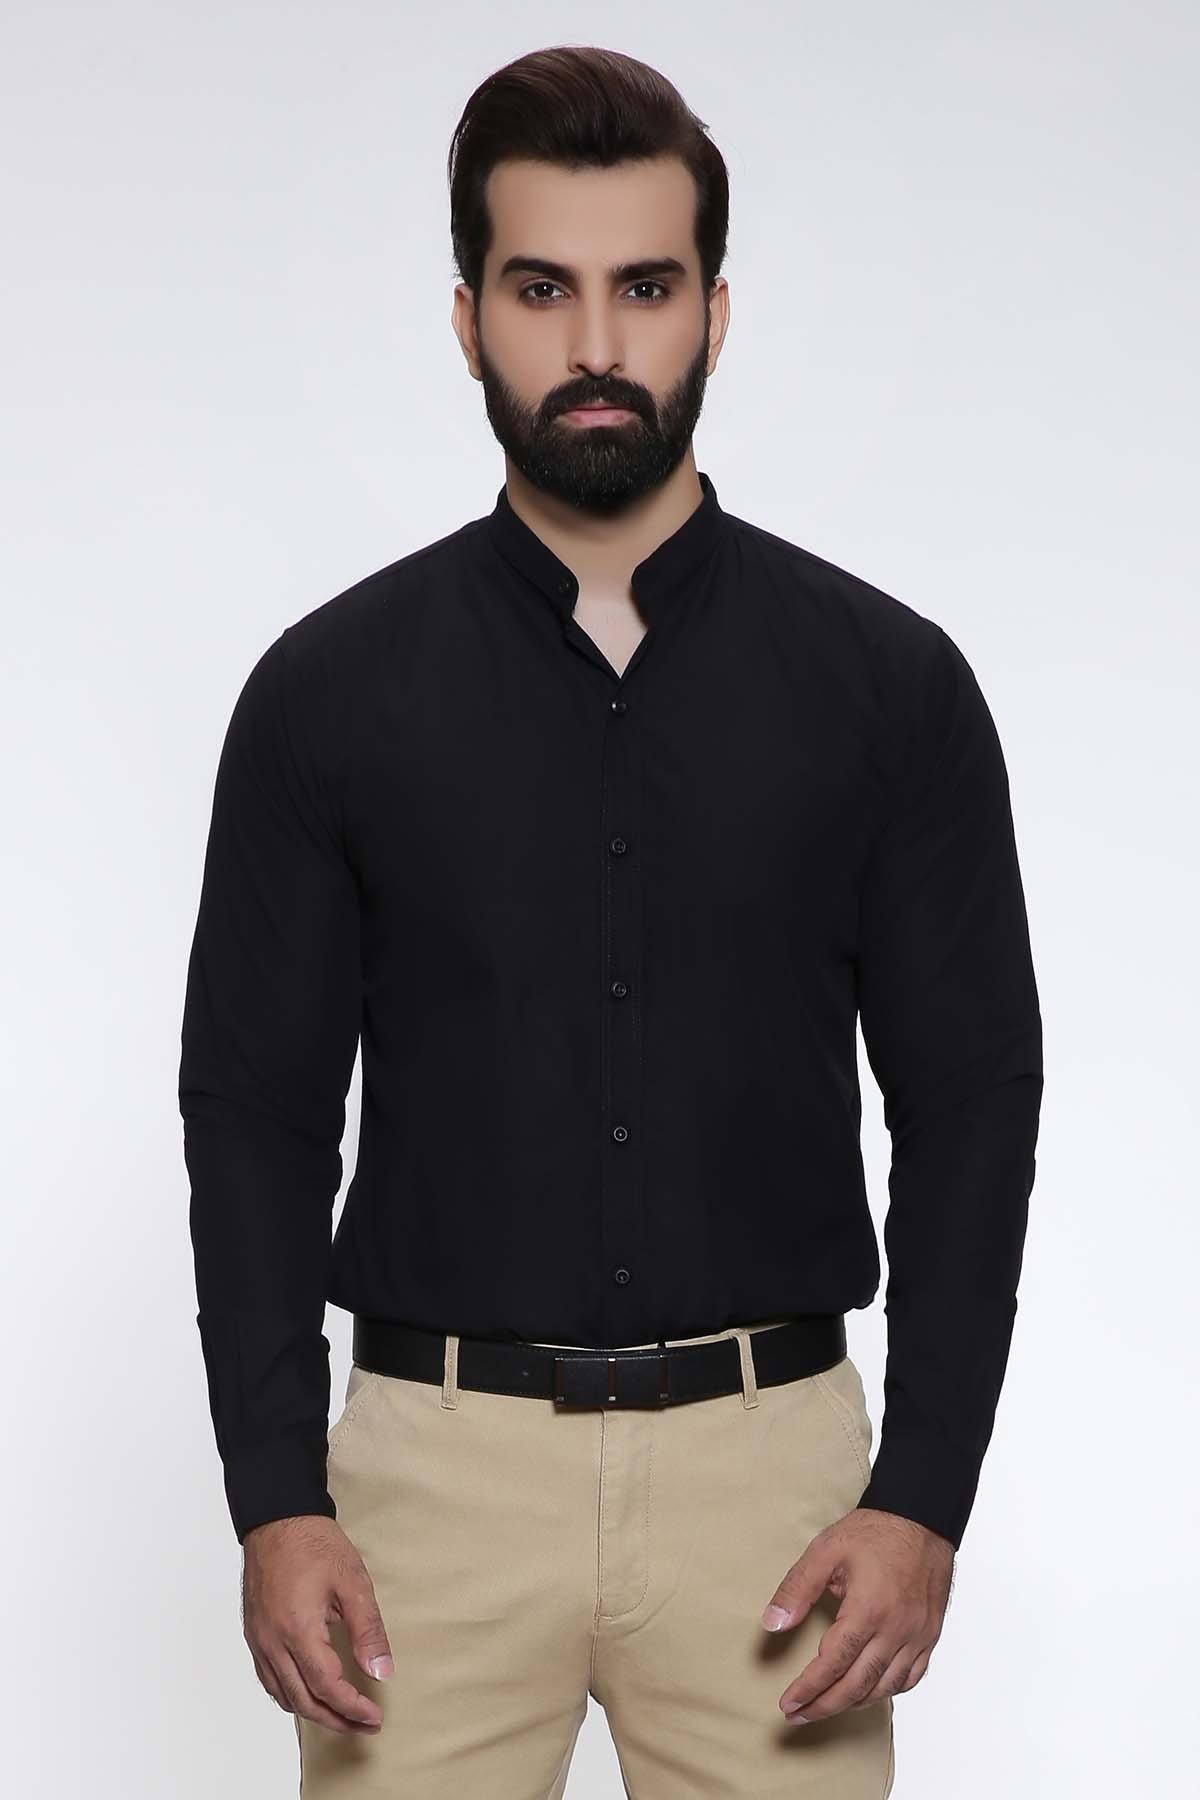 CASUAL SHIRT FULL SLEEVE BLACK SLIM FIT PRE FALL at Charcoal Clothing